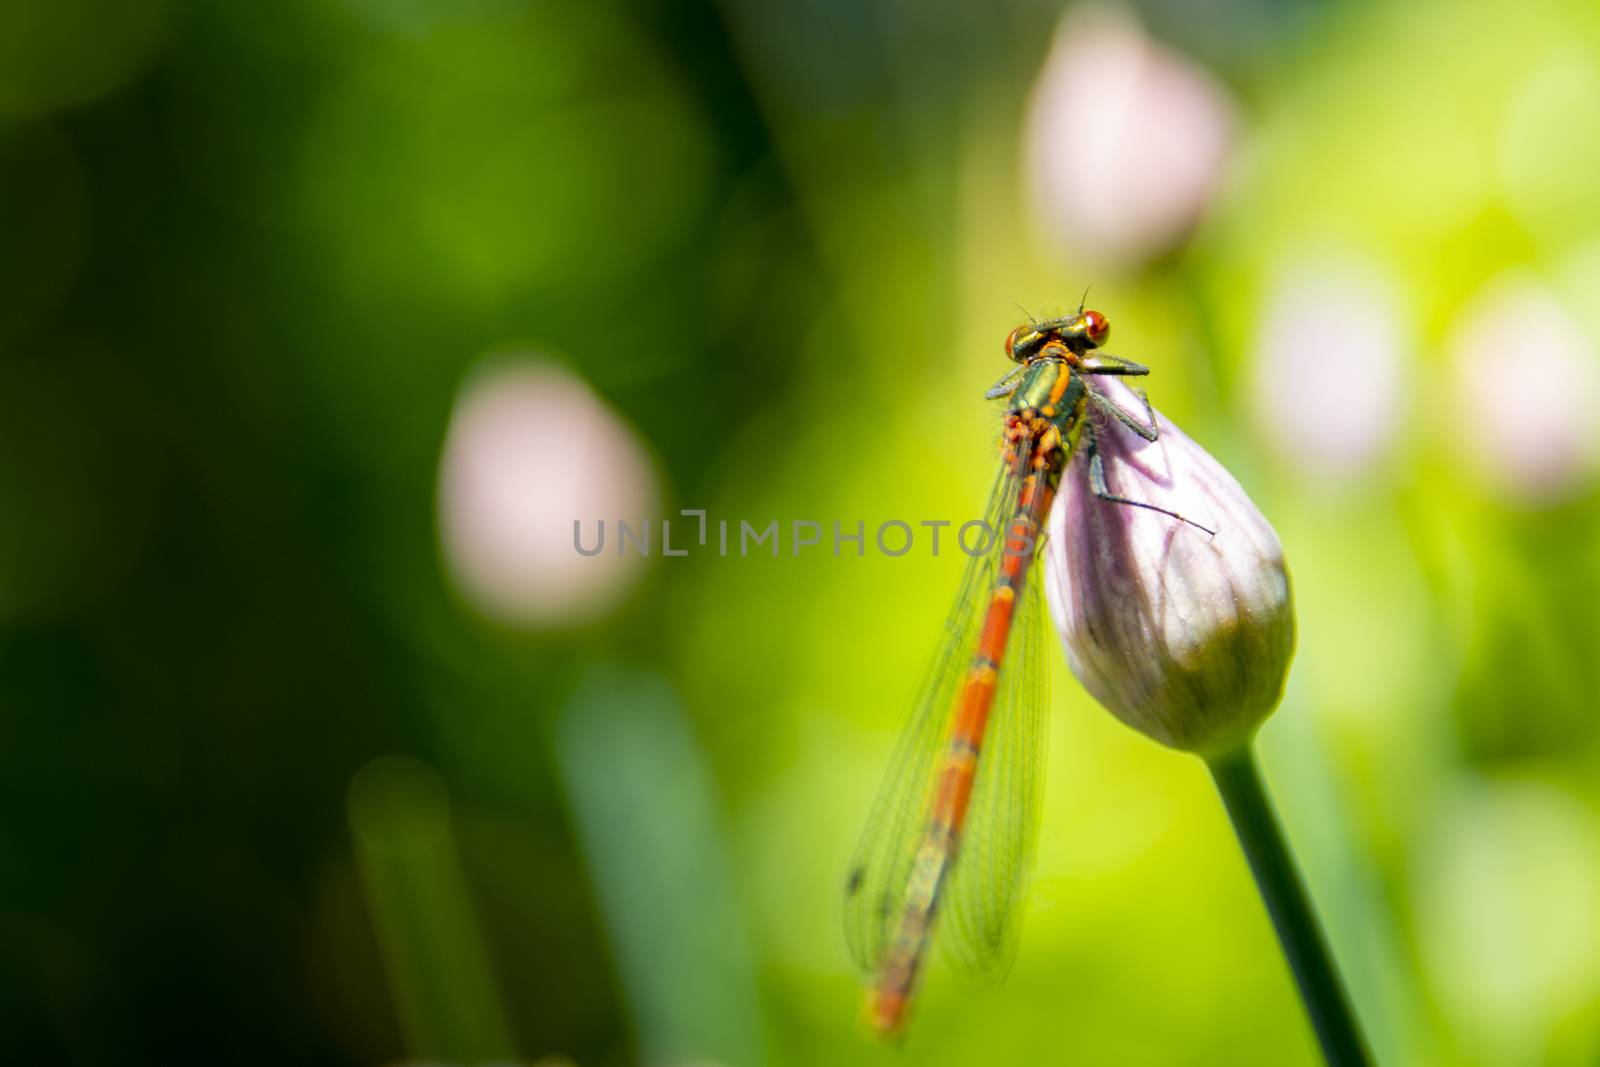 Dragonfly sitting on a closed chive flower bud by kb79